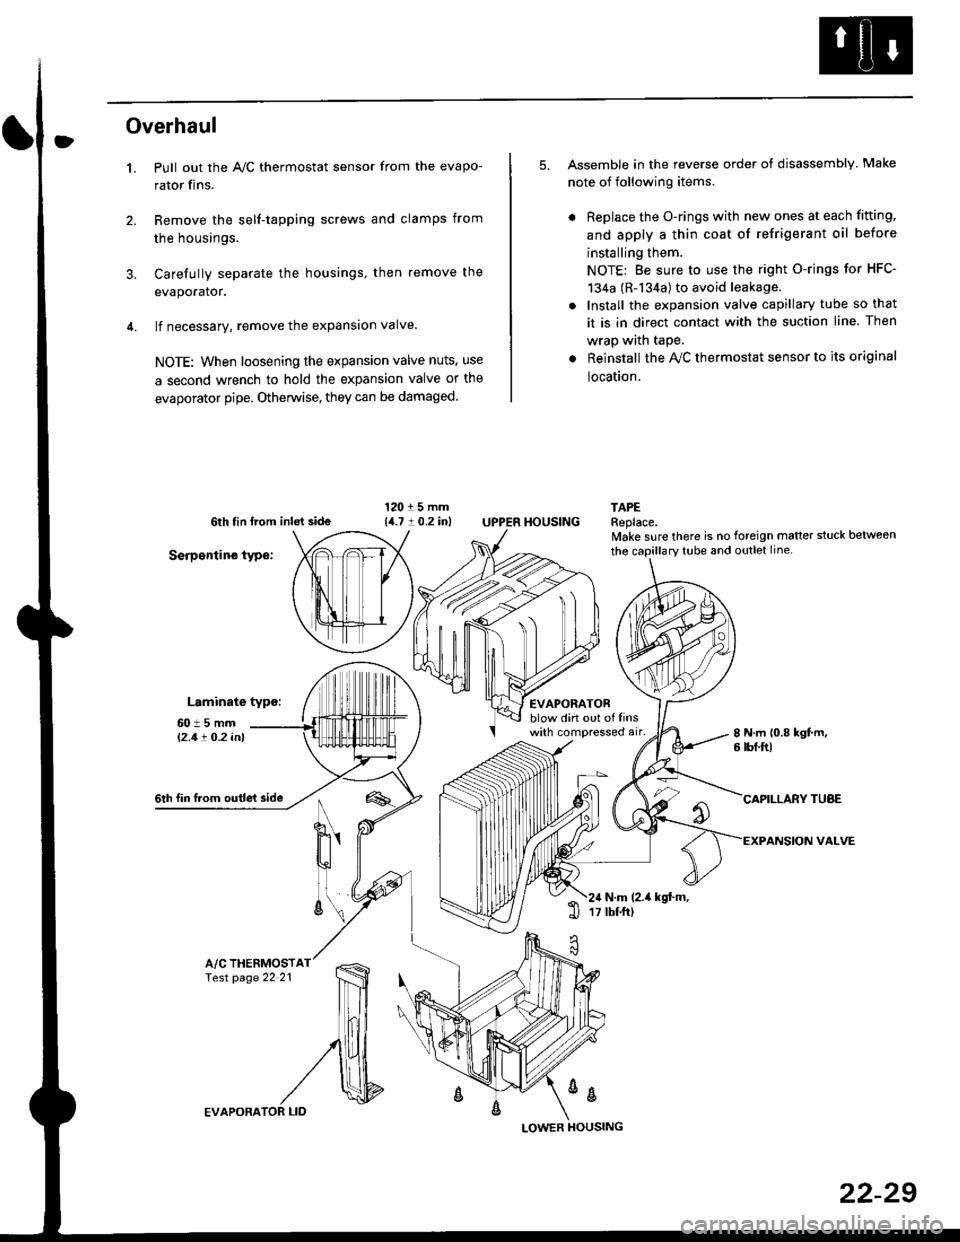 HONDA CIVIC 1996 6.G User Guide Overhaul
1.
3.
Pull out the A,/C thermostat sensor from the evapo-
rator fins.
Remove the self-tapping screws and clamps from
the housings.
Carefully separate the housings, then remove the
evaporator.